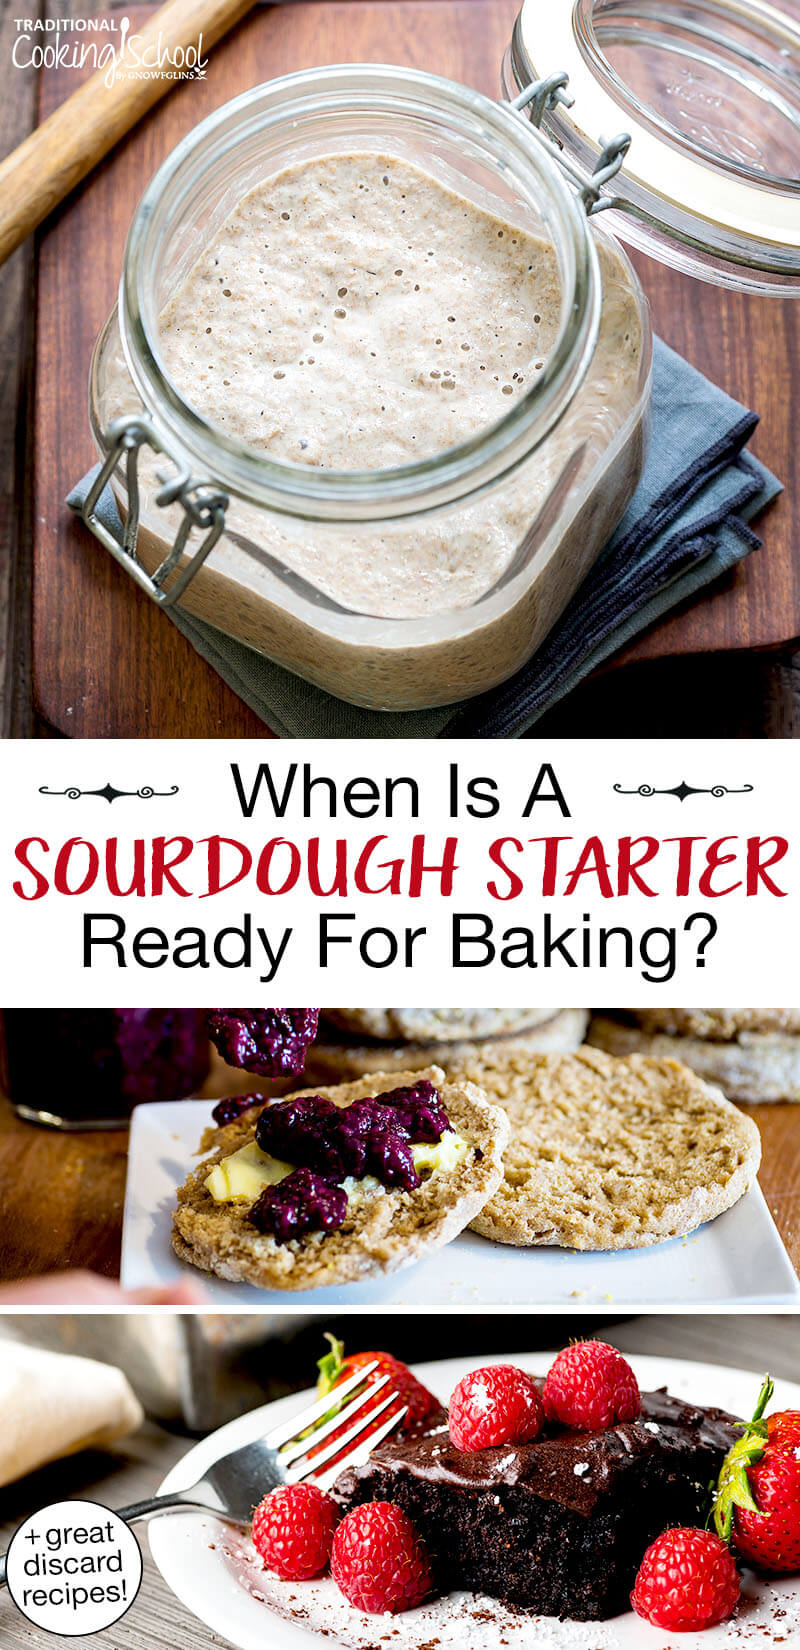 Photo collage of bubbly sourdough starter, sourdough chocolate cake topped with raspberries, and sourdough English spread with jam and butter. Text overlay says: "When Is A Sourdough Starter Ready For Baking? (+great discard recipes!)"